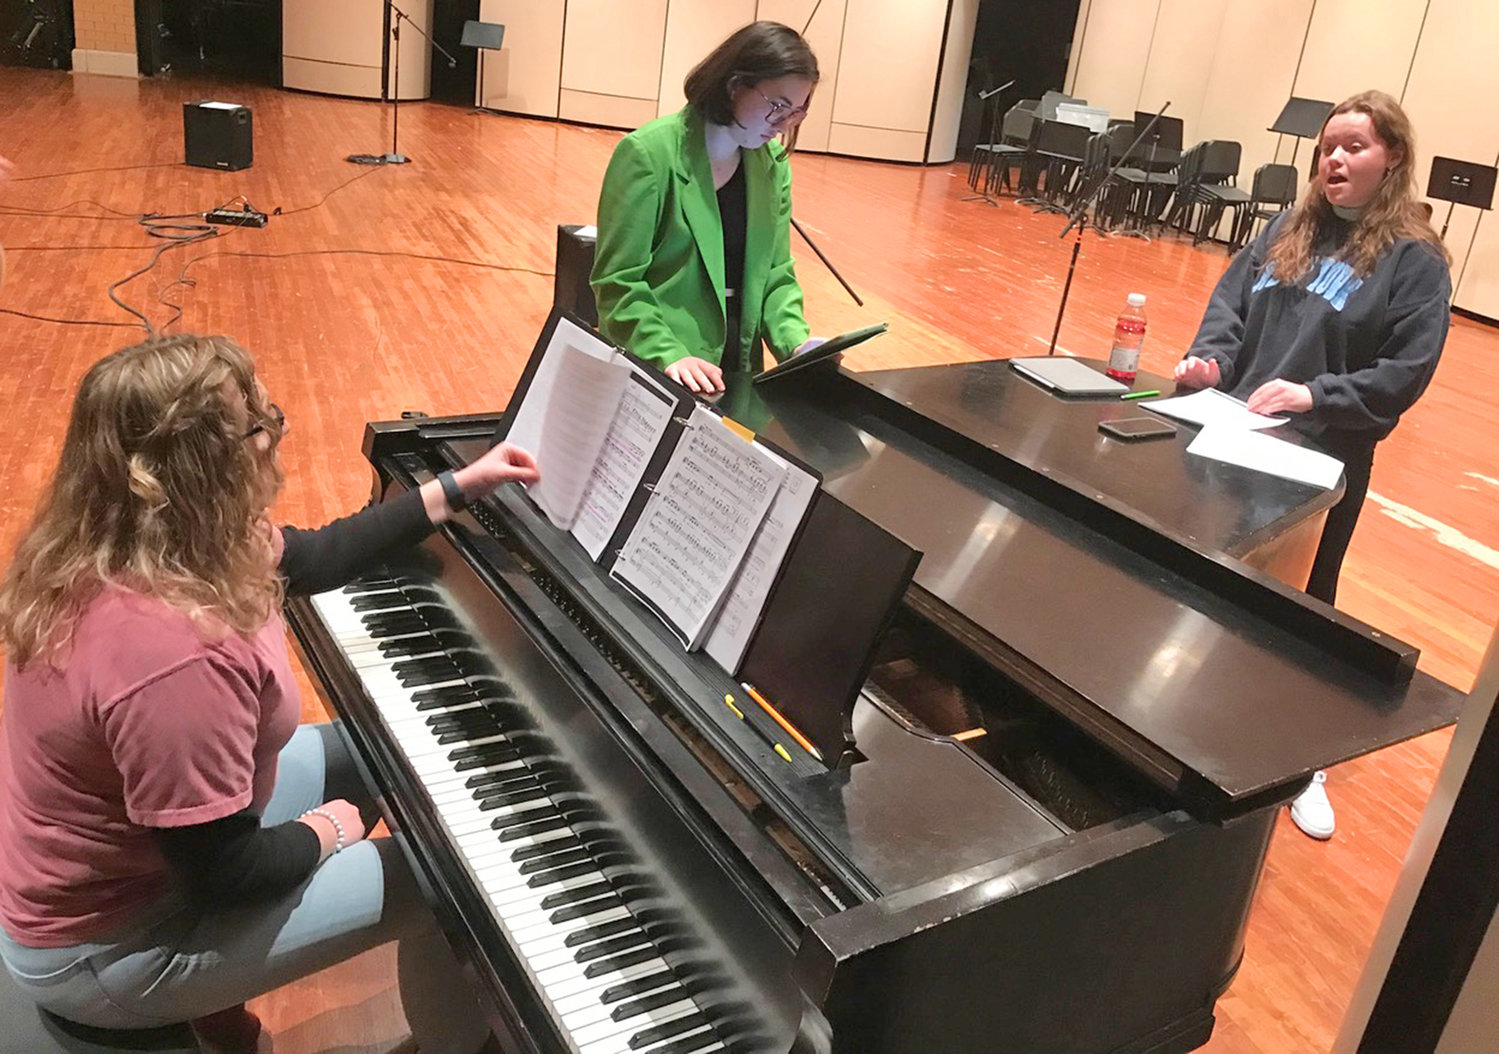 Rome Free Academy graduates, from left, Rebecca Matte, Abbie Morgan and Kayla Bush rehearse Tuesday, Jan. 3 for their 15th annual student and alumni cabaret revue coming Saturday, Jan. 7 to the RFA auditorium.